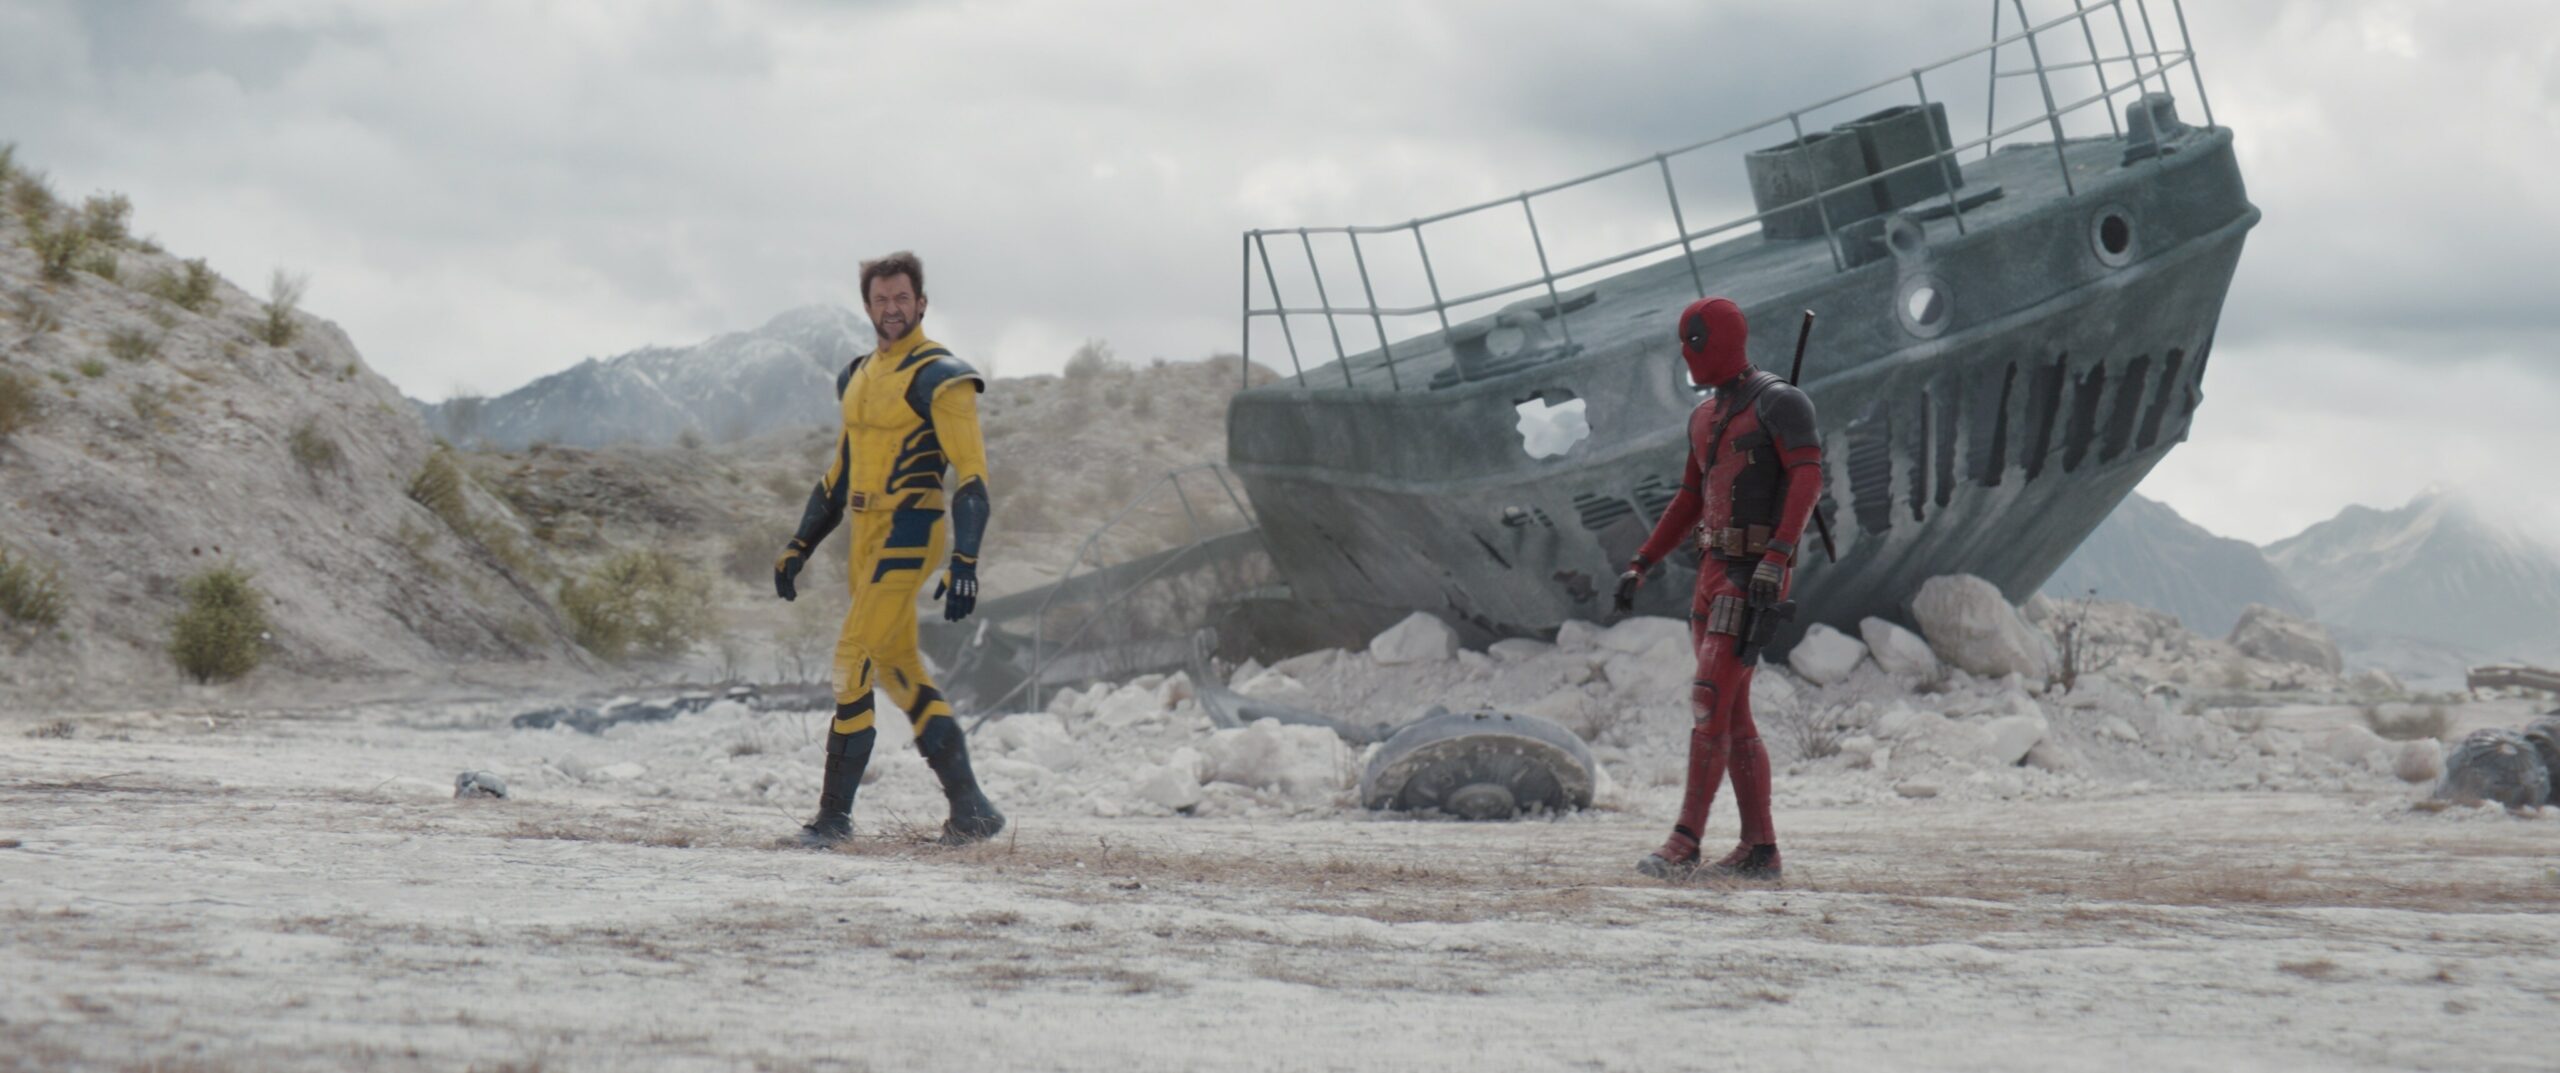 Hugh Jackman as Wolverine and Ryan Reynolds as Deadpool suit up to save the world.